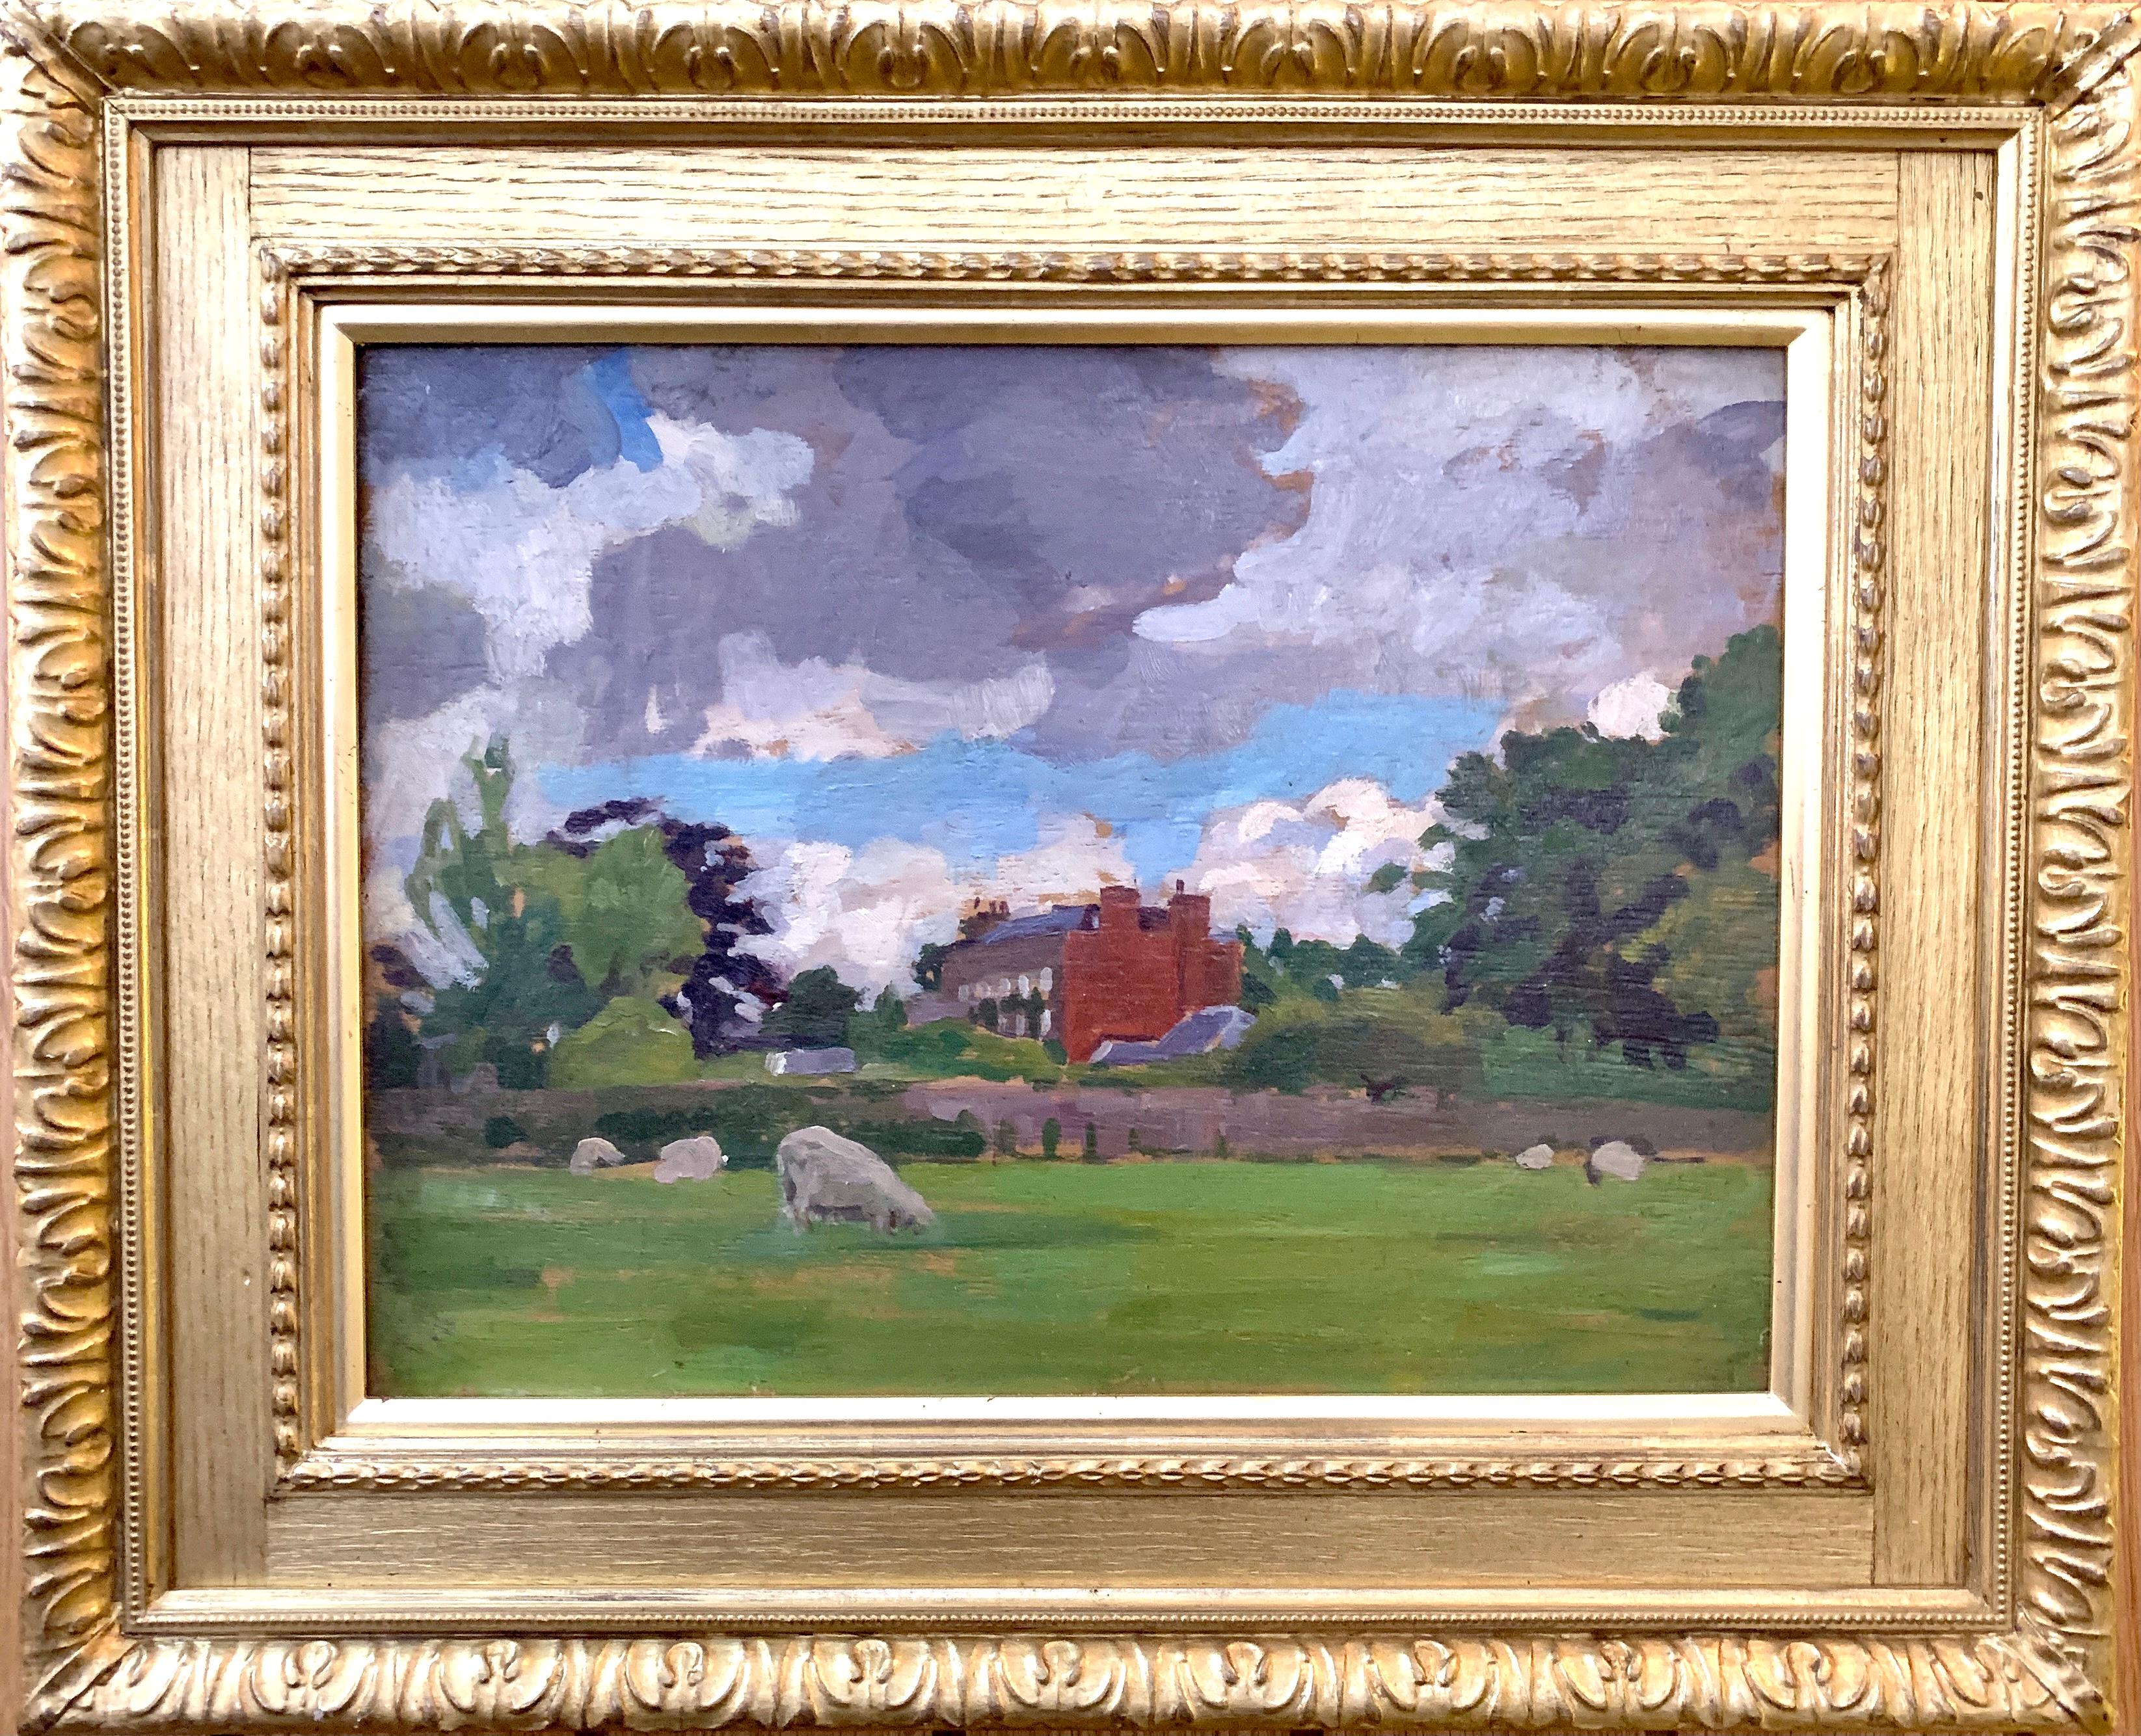 A. Solomon Figurative Painting - English oil Impressionist landscape with sheep in a field. Early 20th century